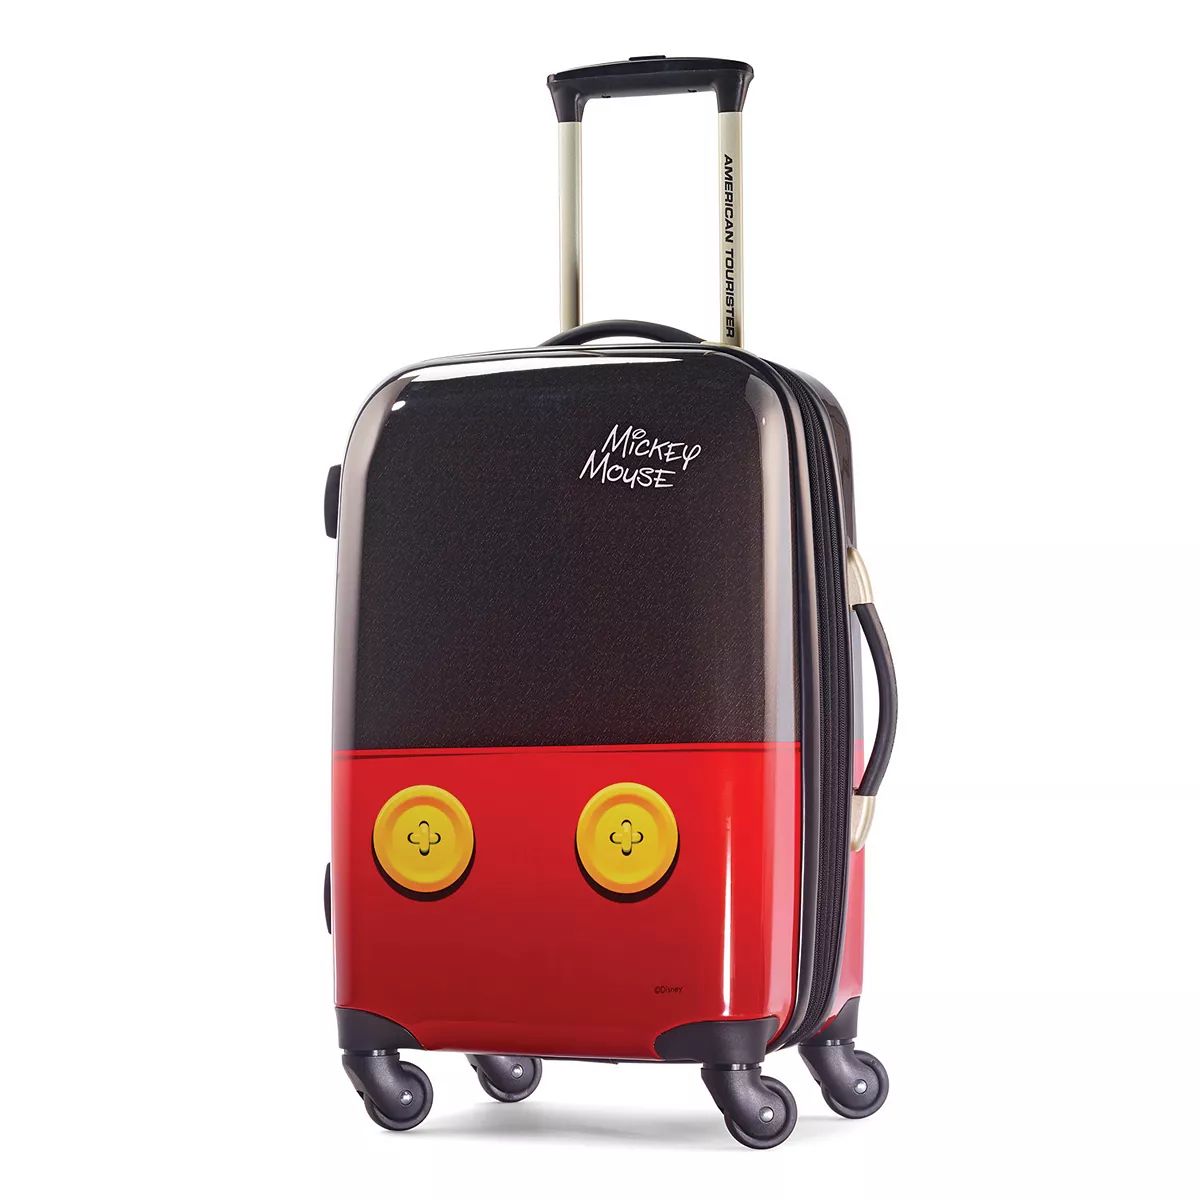 Disney's Mickey Mouse Pants Hardside Spinner Luggage by American Tourister | Kohl's